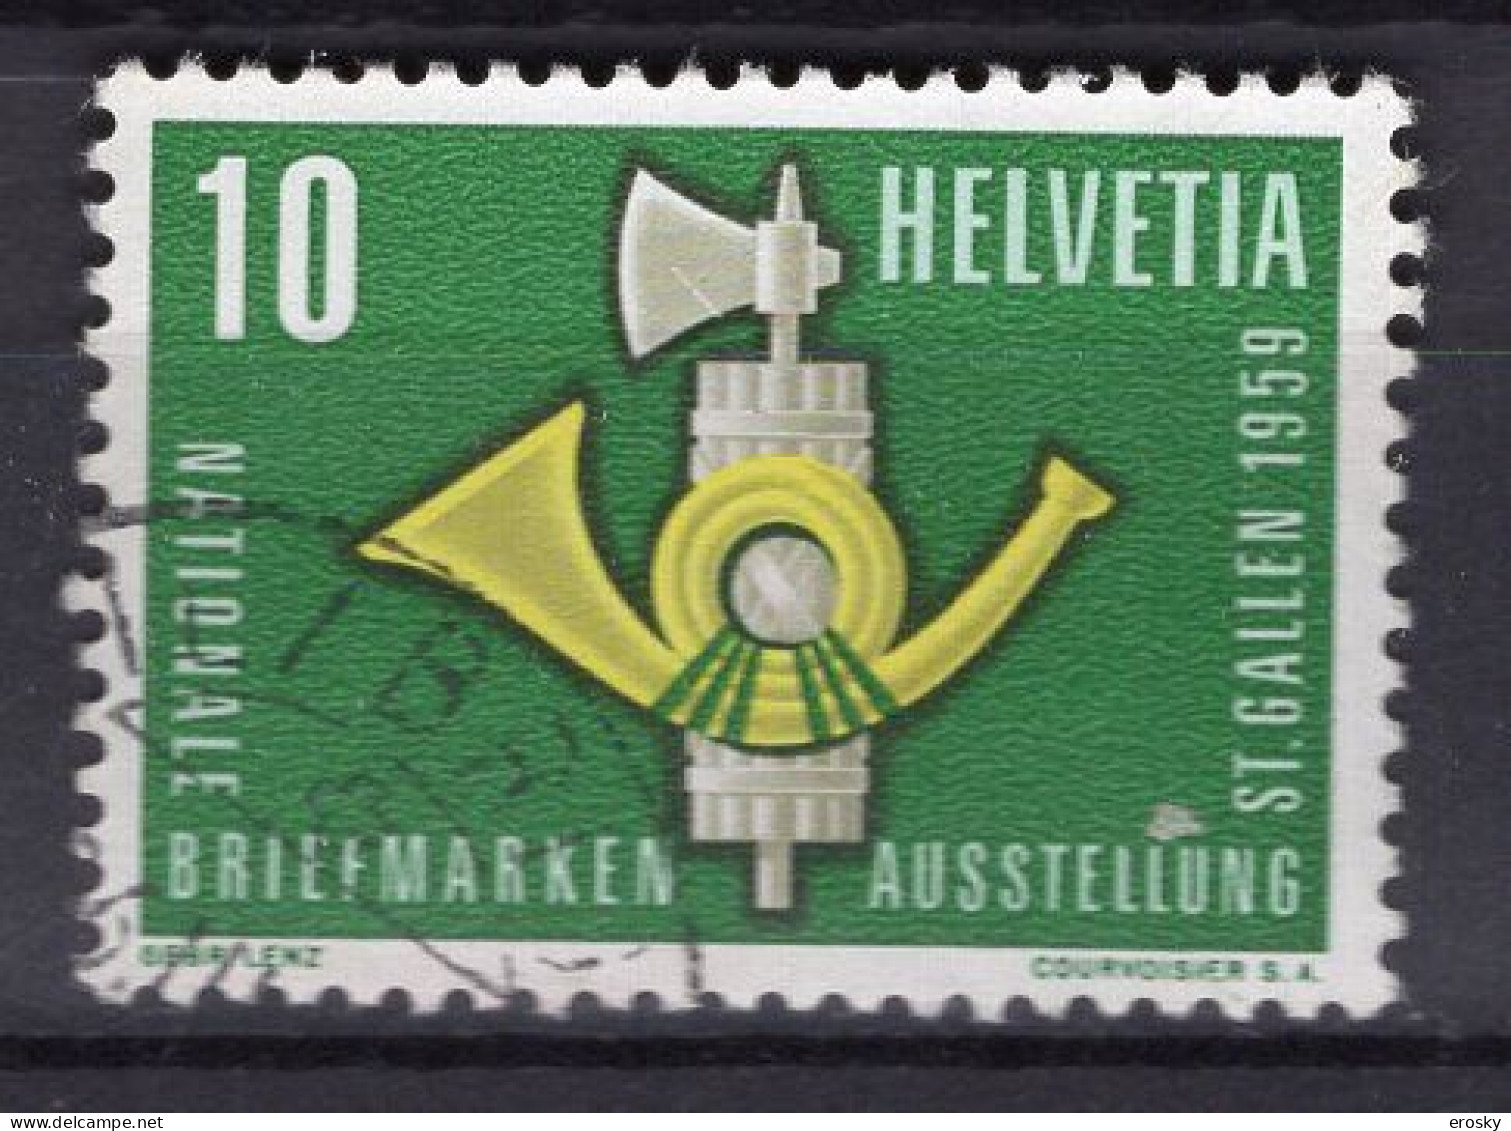 T2068- SUISSE SWITZERLAND Yv N°622 - Used Stamps